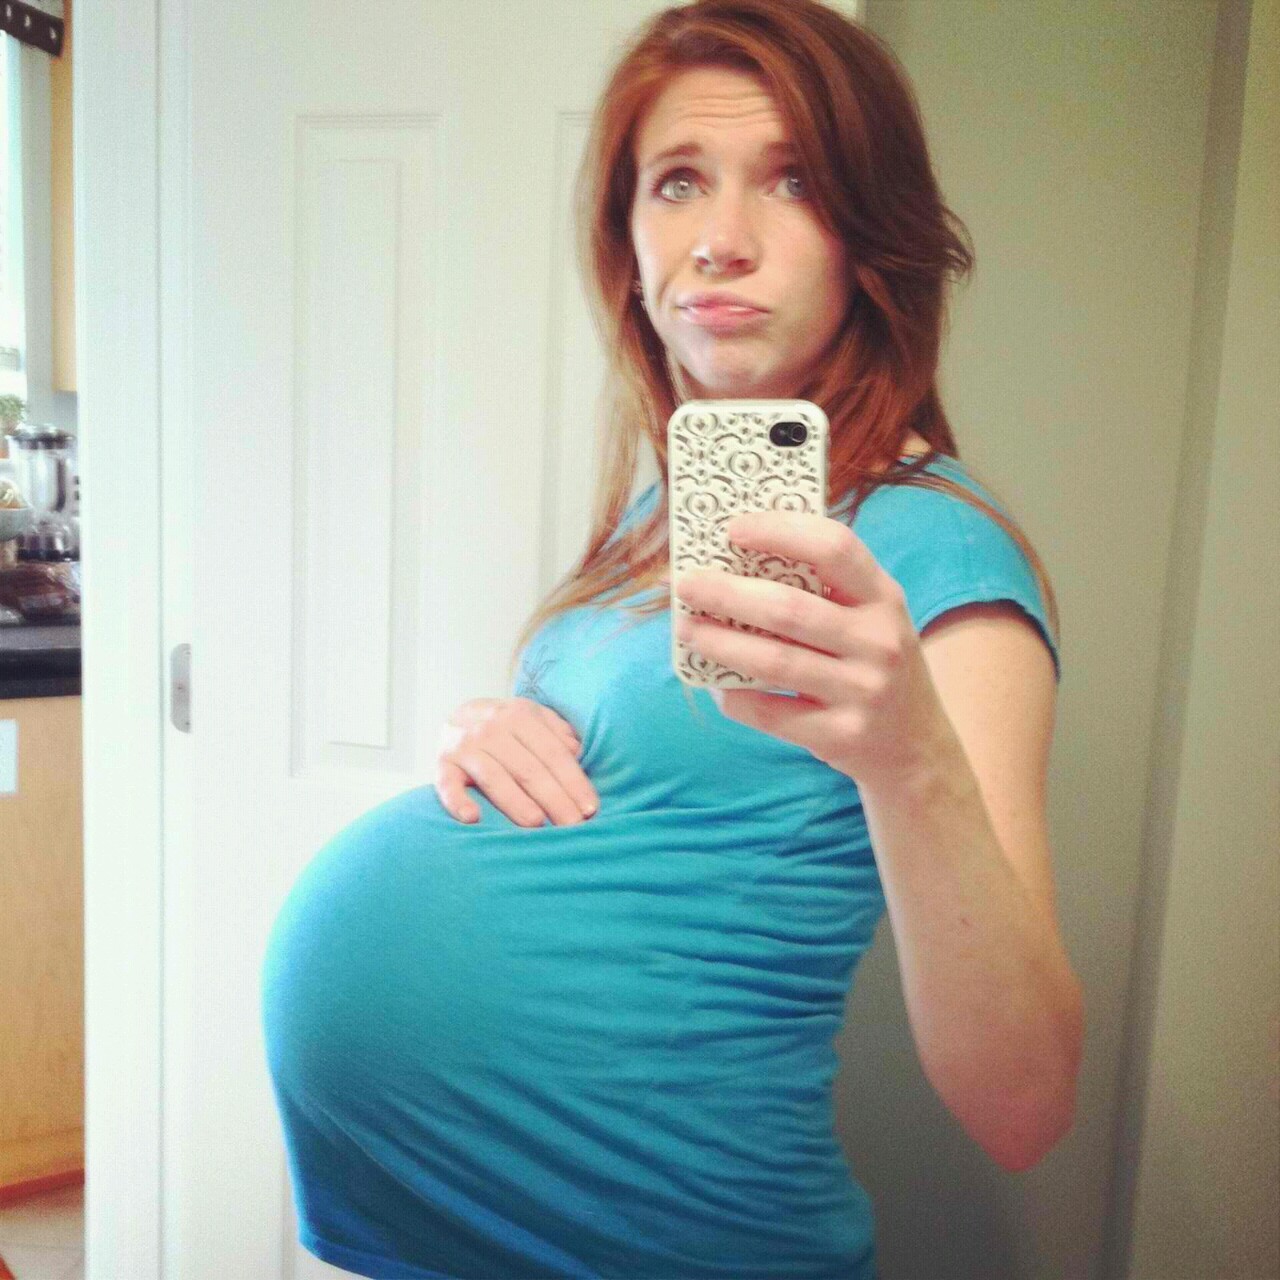 nonudepreg:The beauty of the female pregnant form. Check my facebook page : https://www.facebook.com/pages/Nonude-pregnant-photos/753234314758756